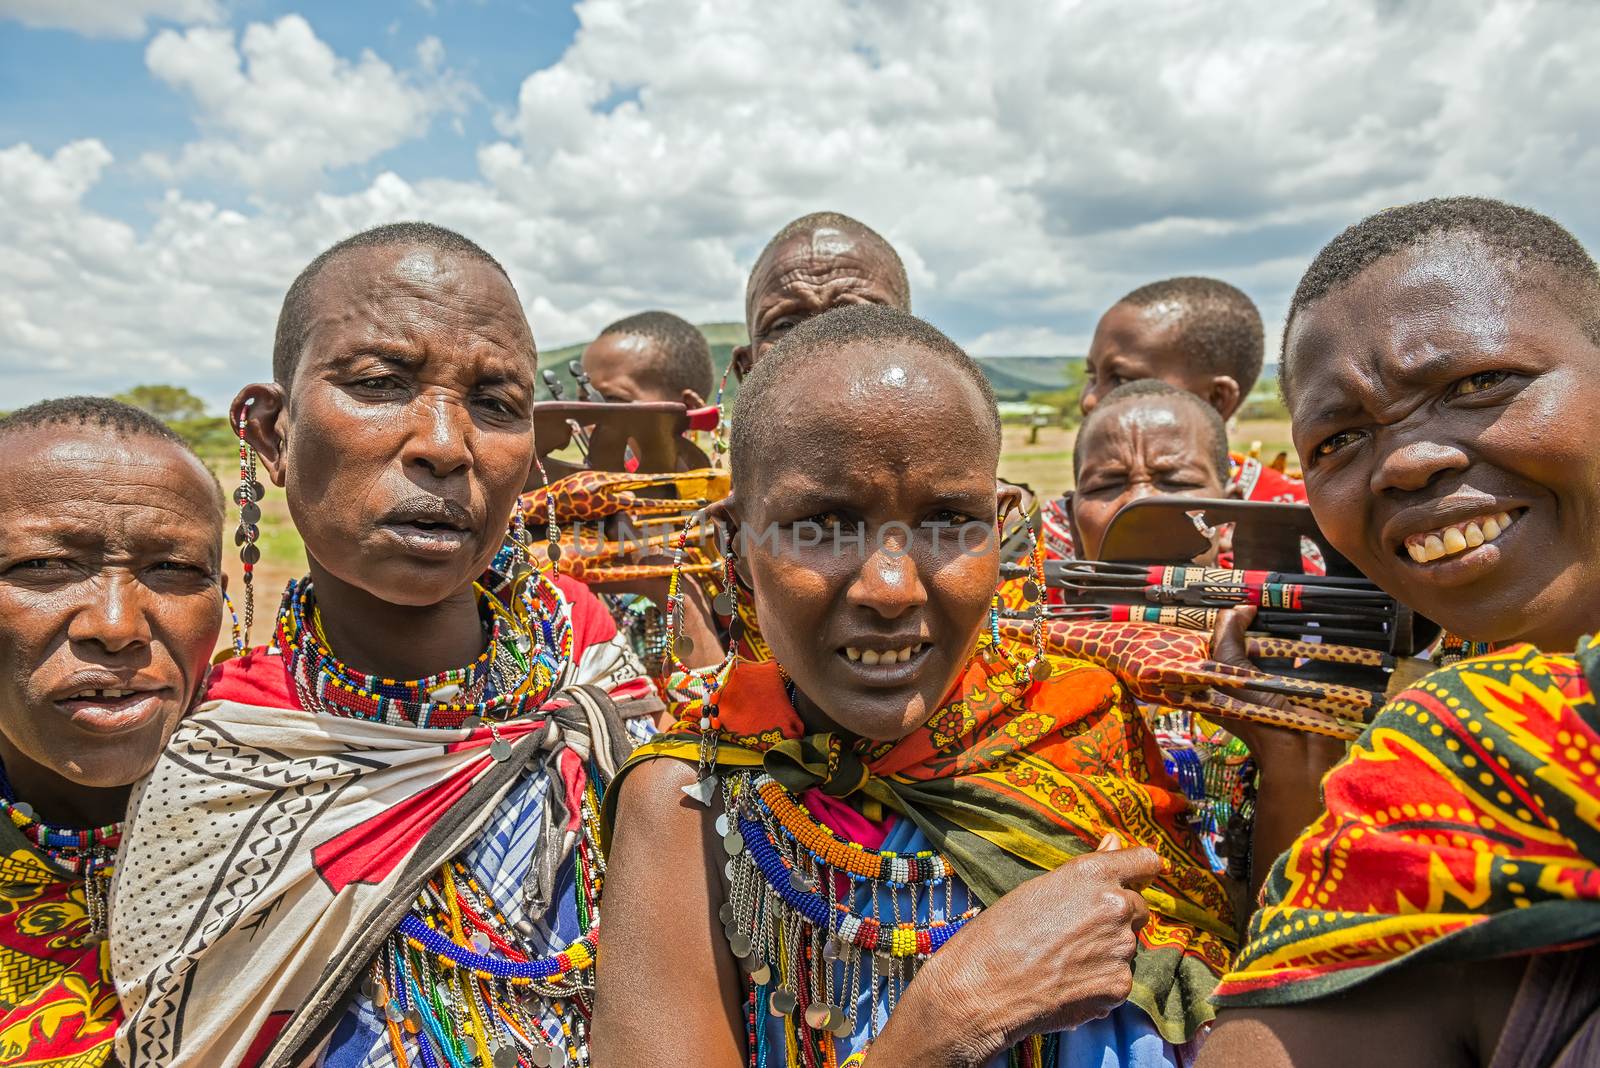 Group of Maasai people with traditional jewelry in Kenya by nickfox